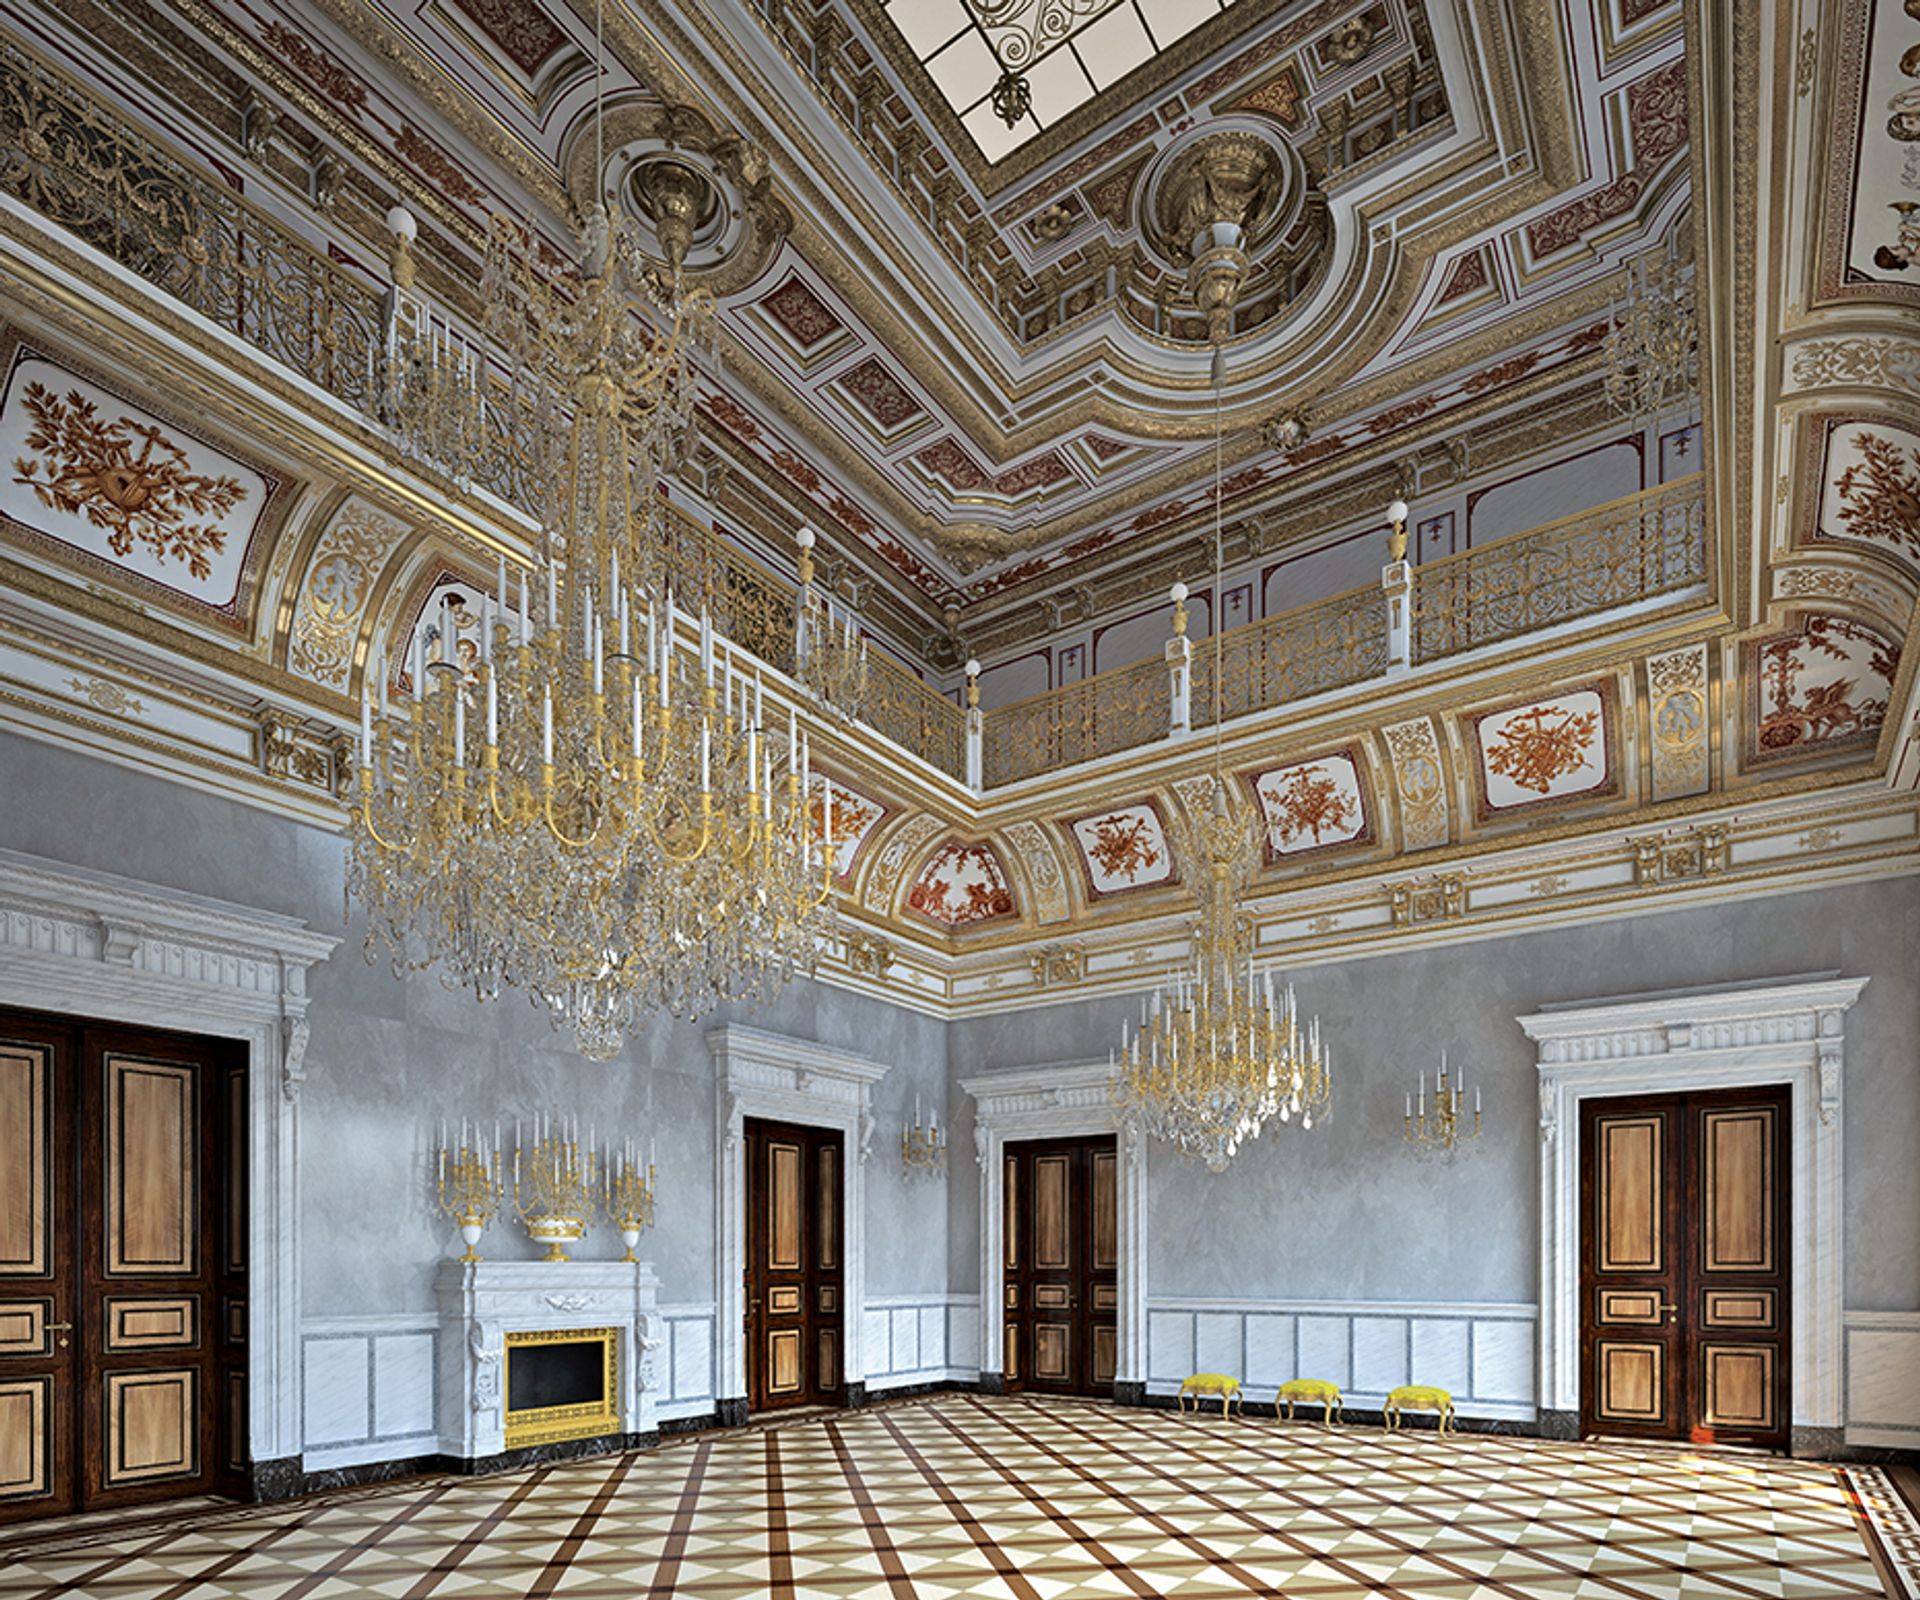 An architect’s visualisation of the restored Small Ballroom in the Georgenbau in Dresden’s Residential Palace complex ©Andreas Hummel/Staatliche Kunstsammlungen Dresden